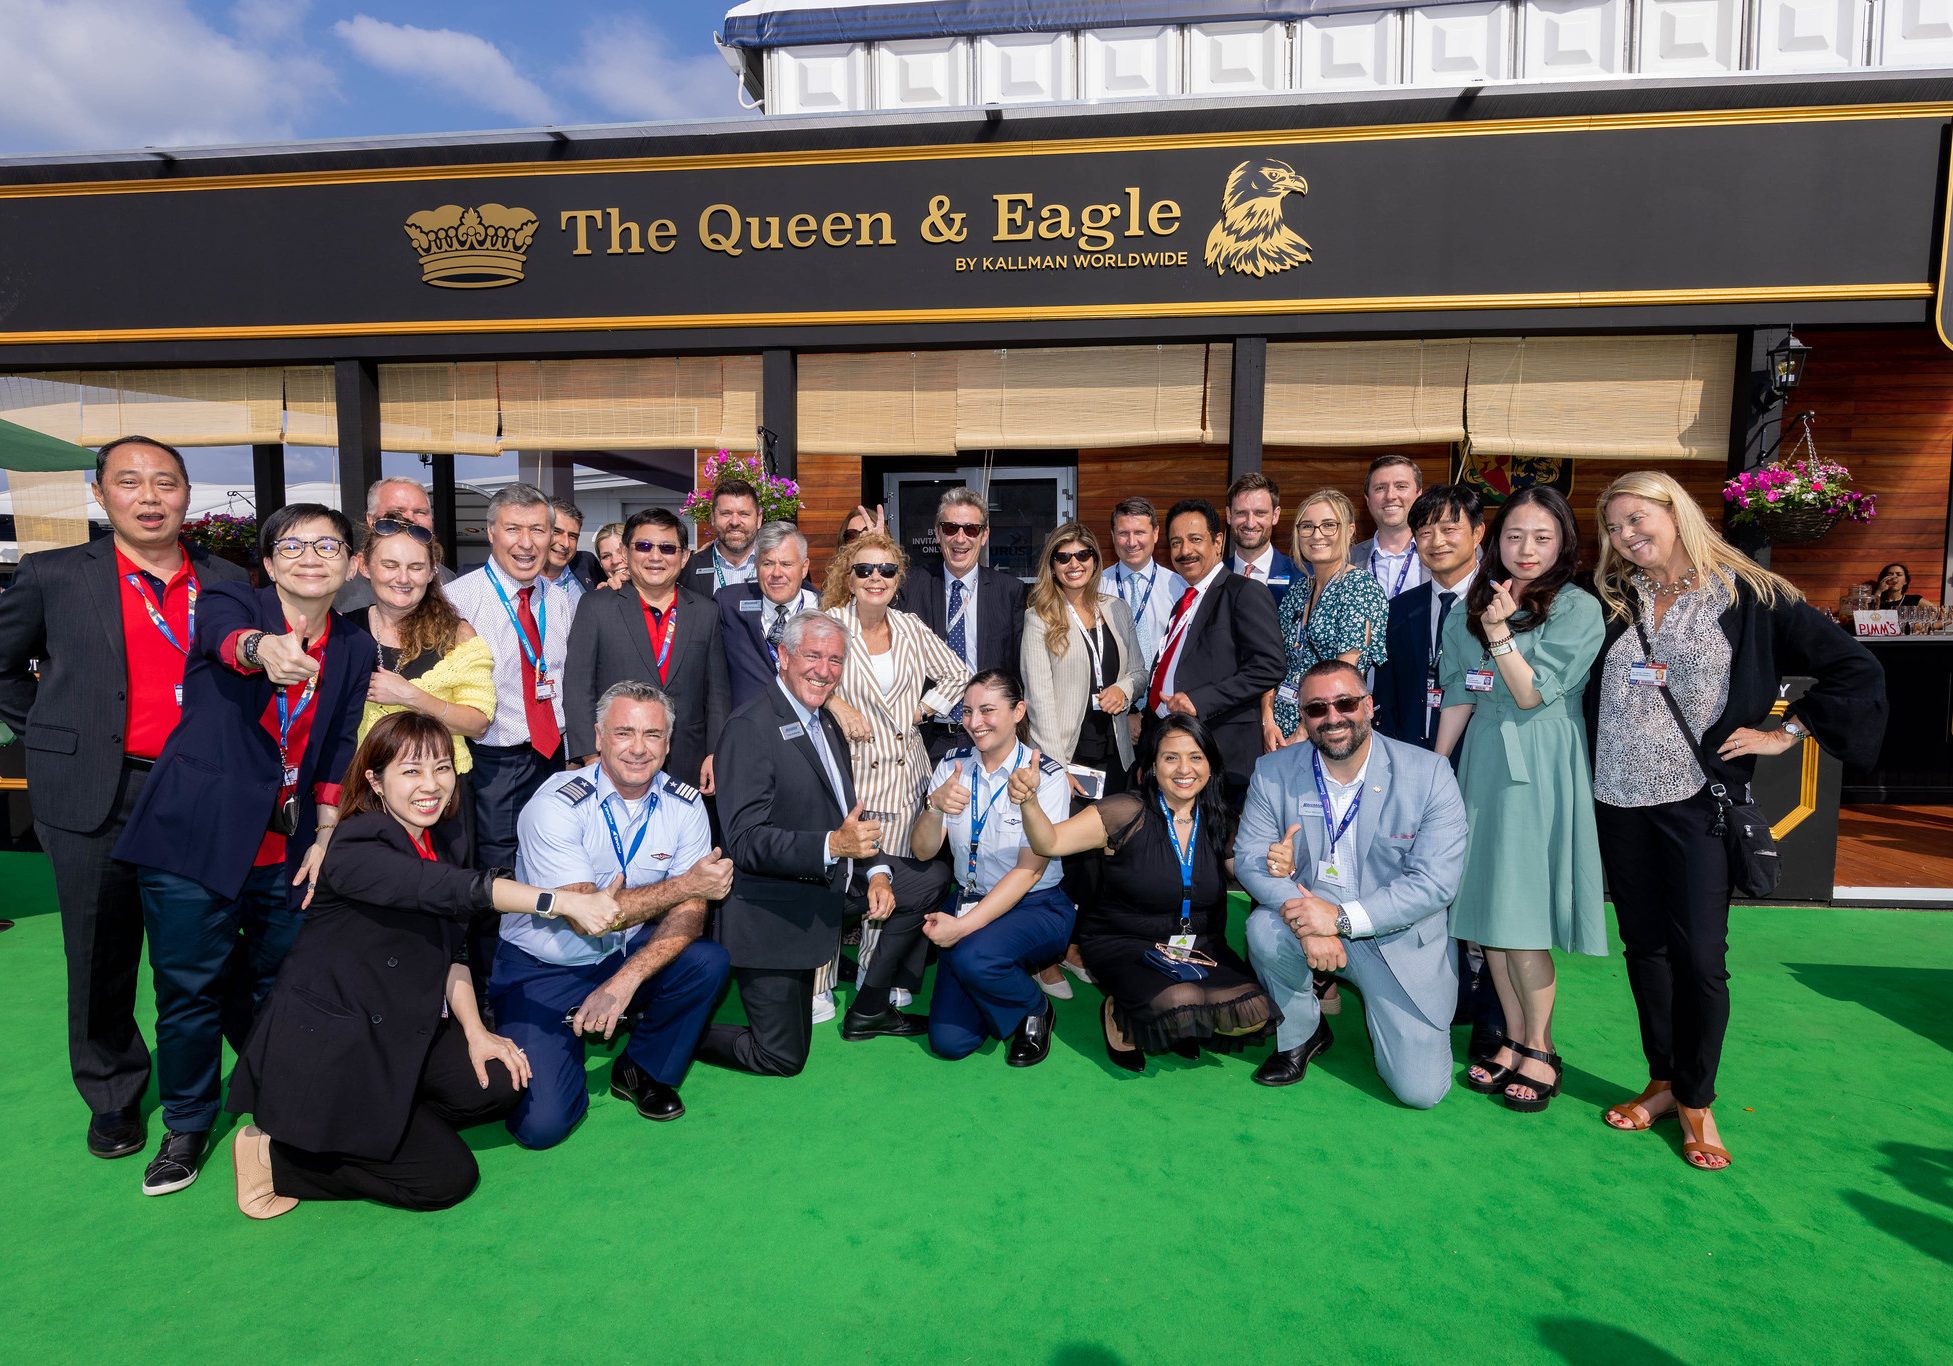 Exhibitor Event at the Partnership Chalet at the Farnborough International Air Show